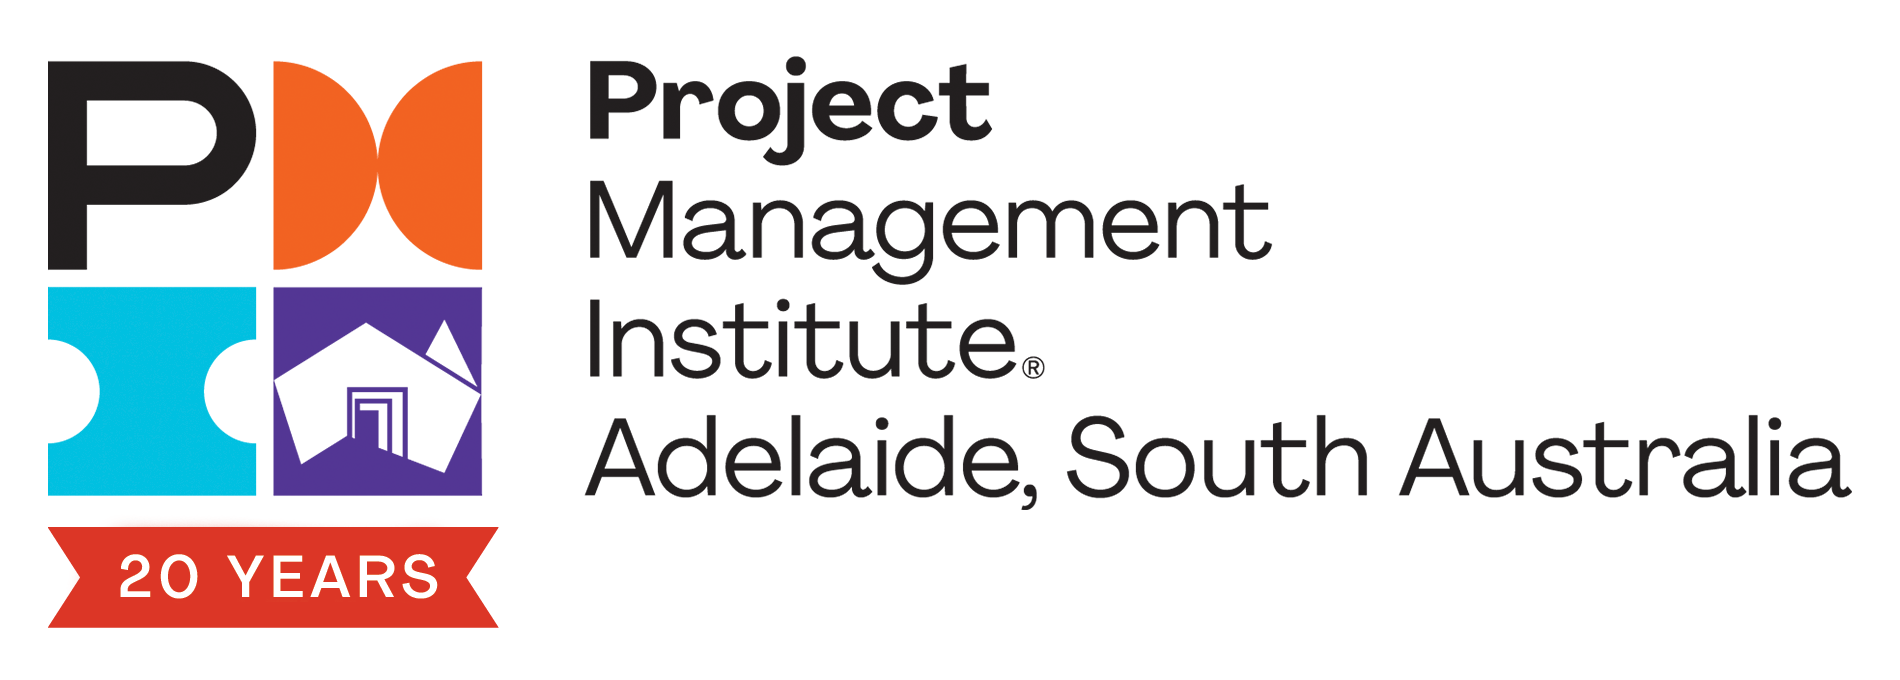 PMI-Adelaide-20-Years-Logo.png